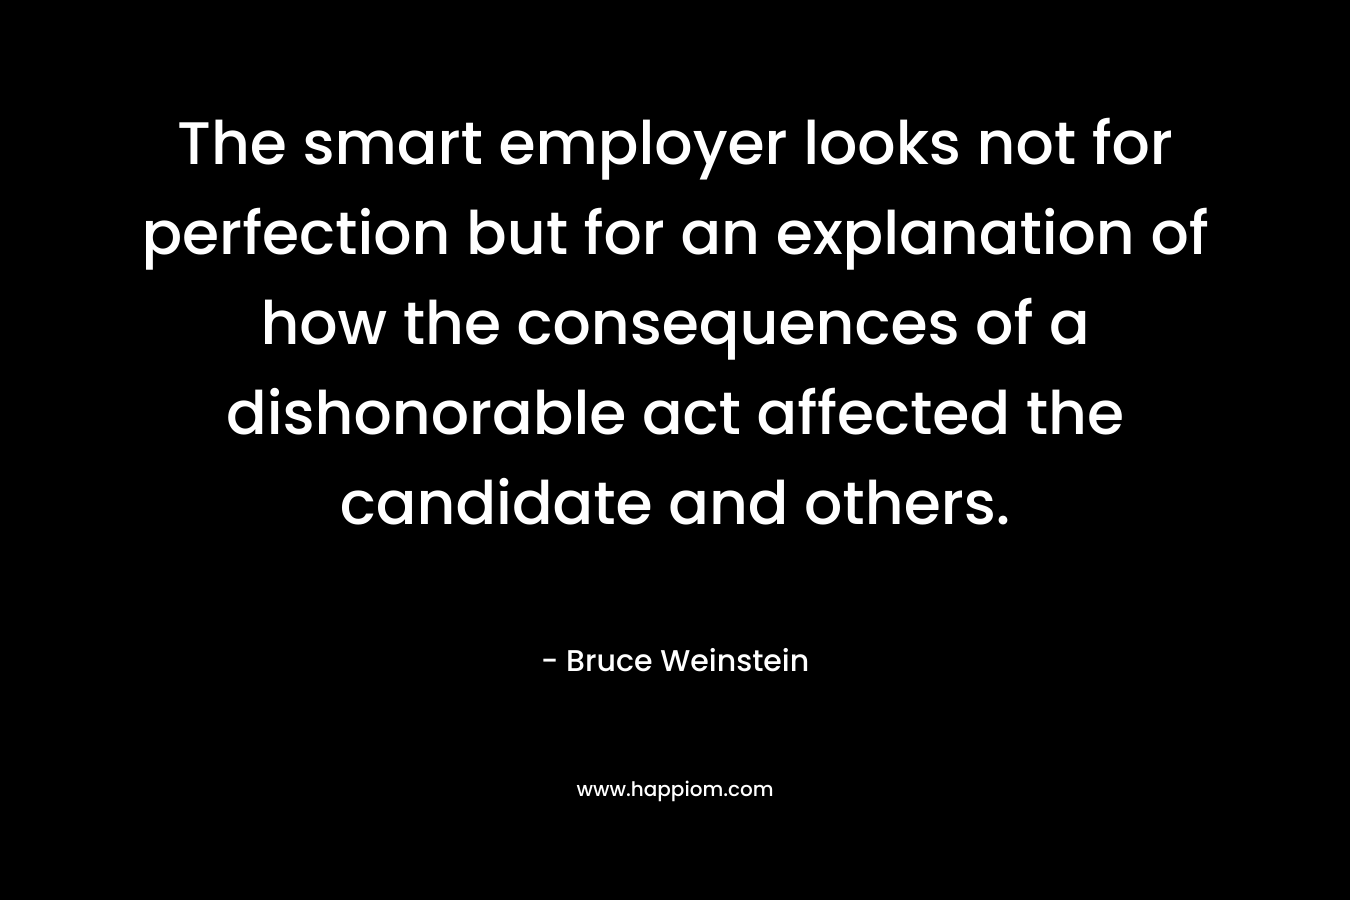 The smart employer looks not for perfection but for an explanation of how the consequences of a dishonorable act affected the candidate and others. – Bruce Weinstein